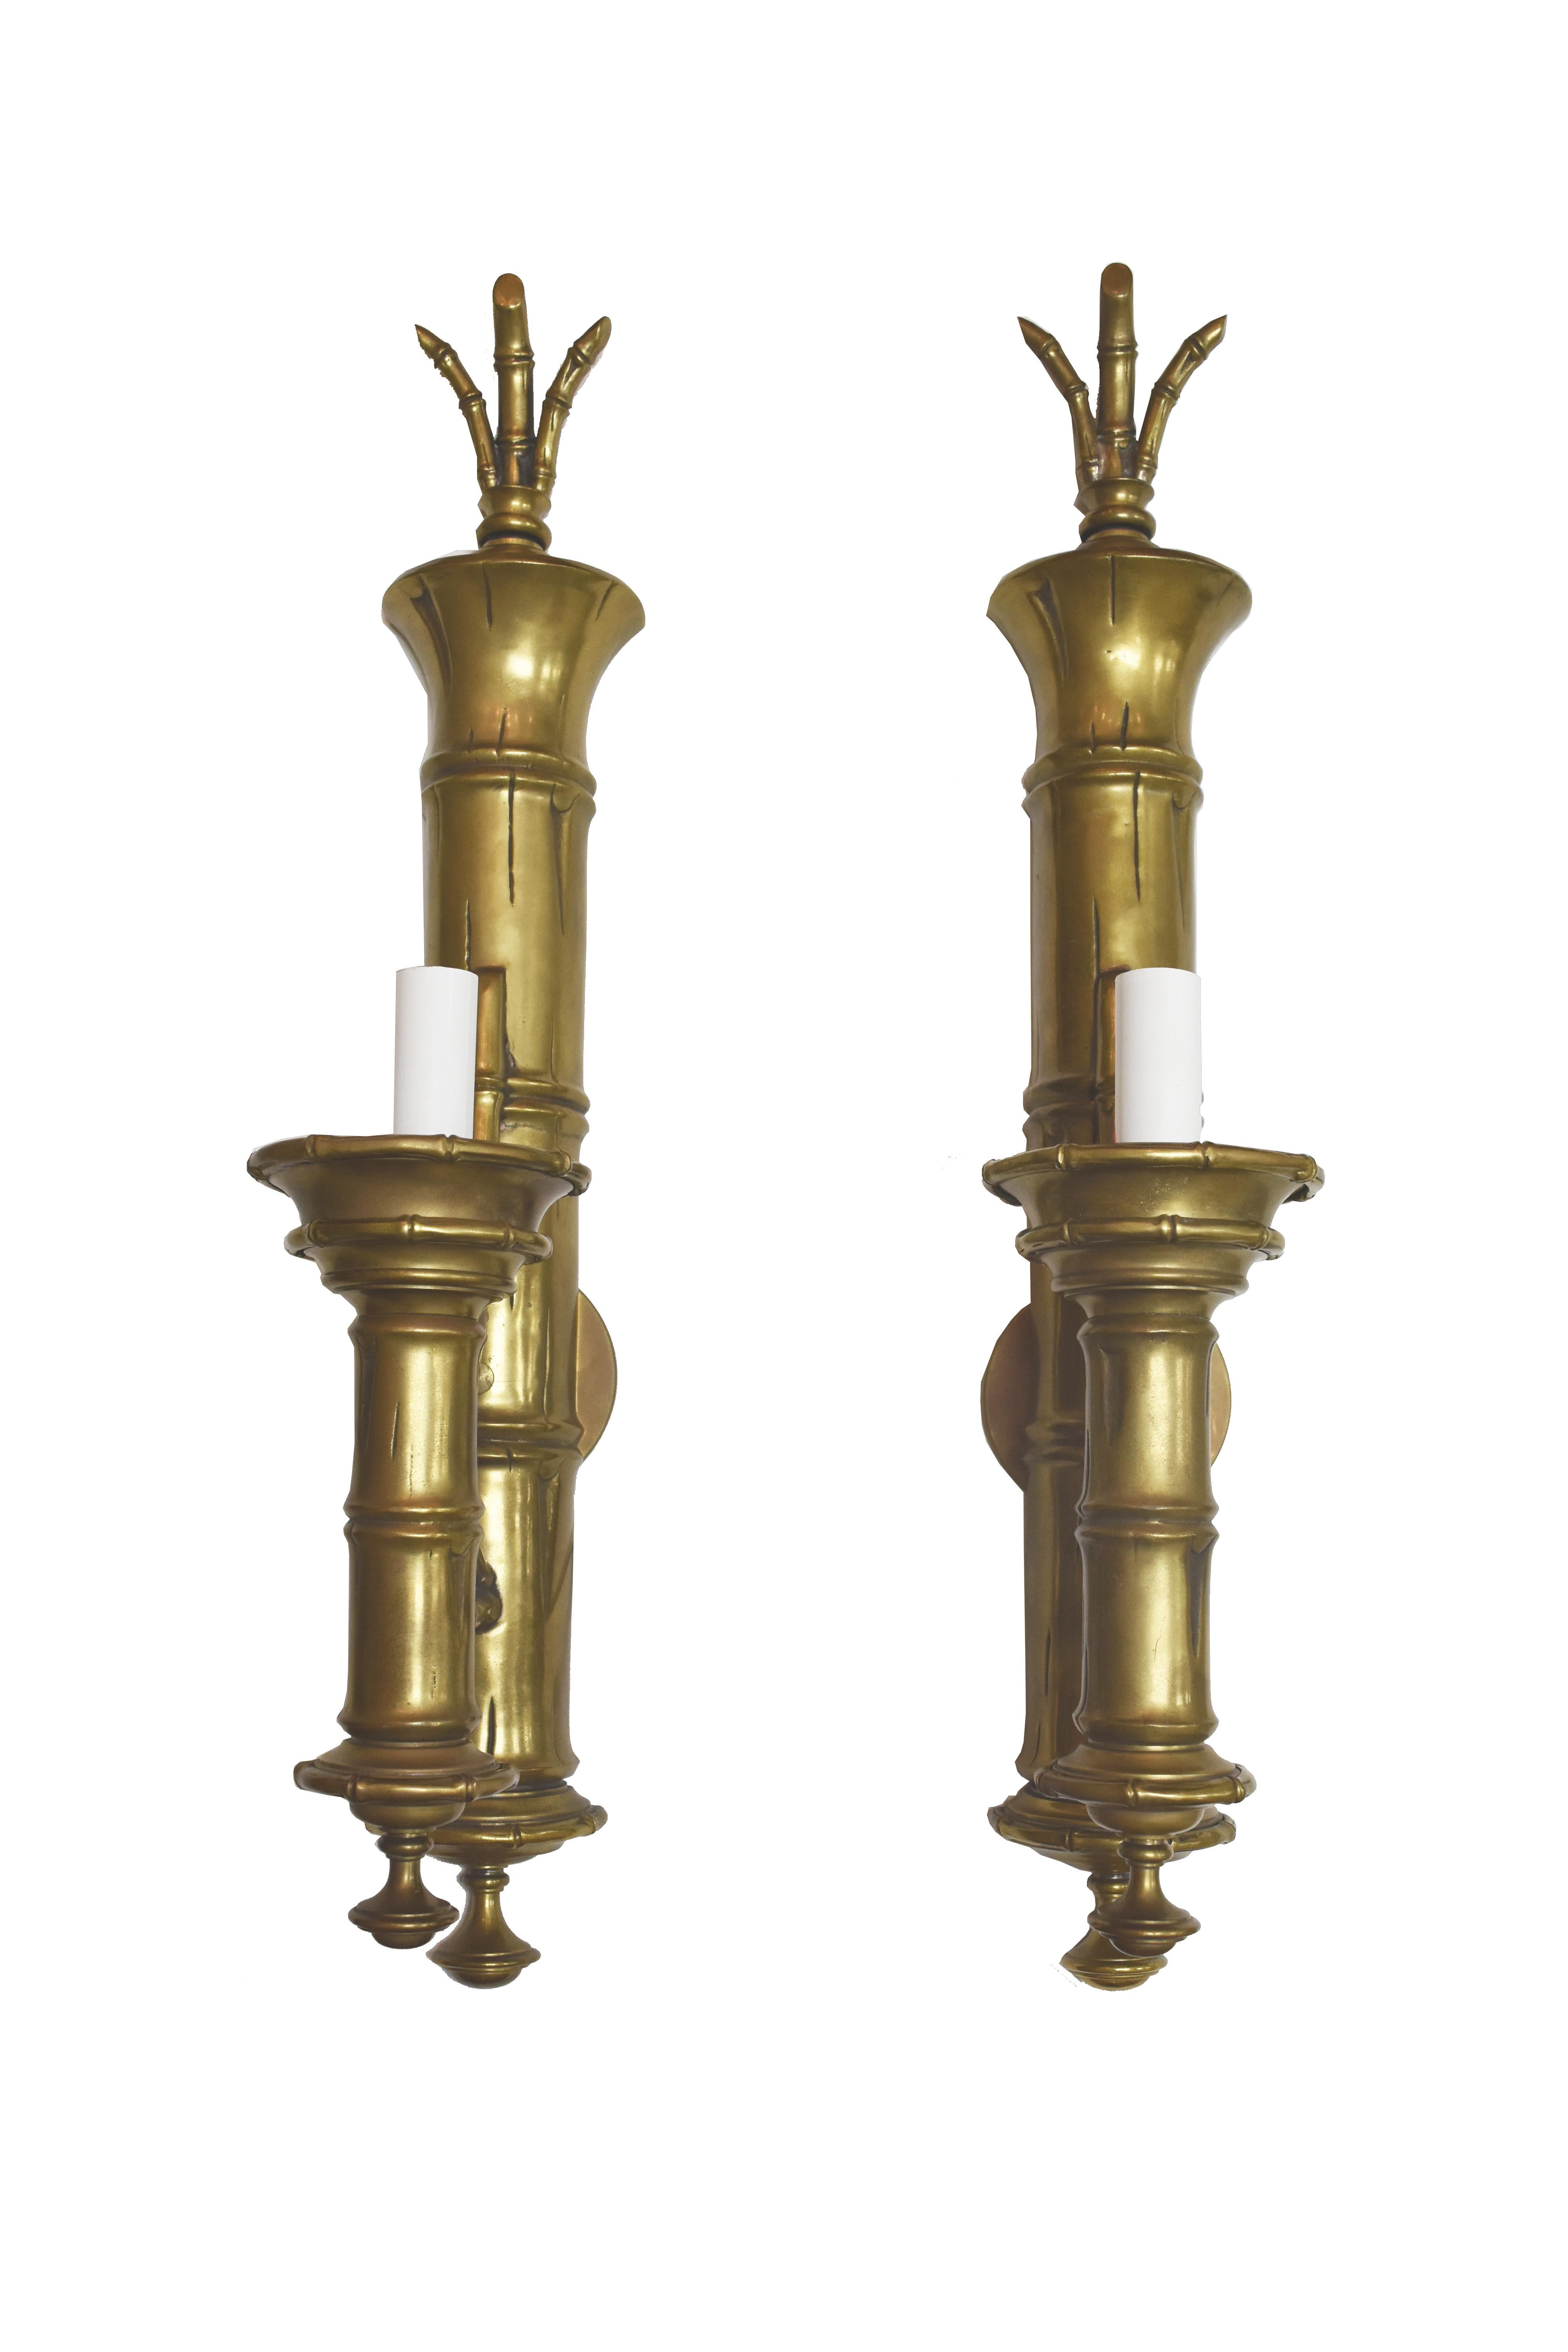 There are actually two pair (a total of four) of these large vintage brass bamboo sconces believed to be by E.F. Chapman. The bamboo design is not only on the sconce back but also at the base of the hurricane shade and around the top of the